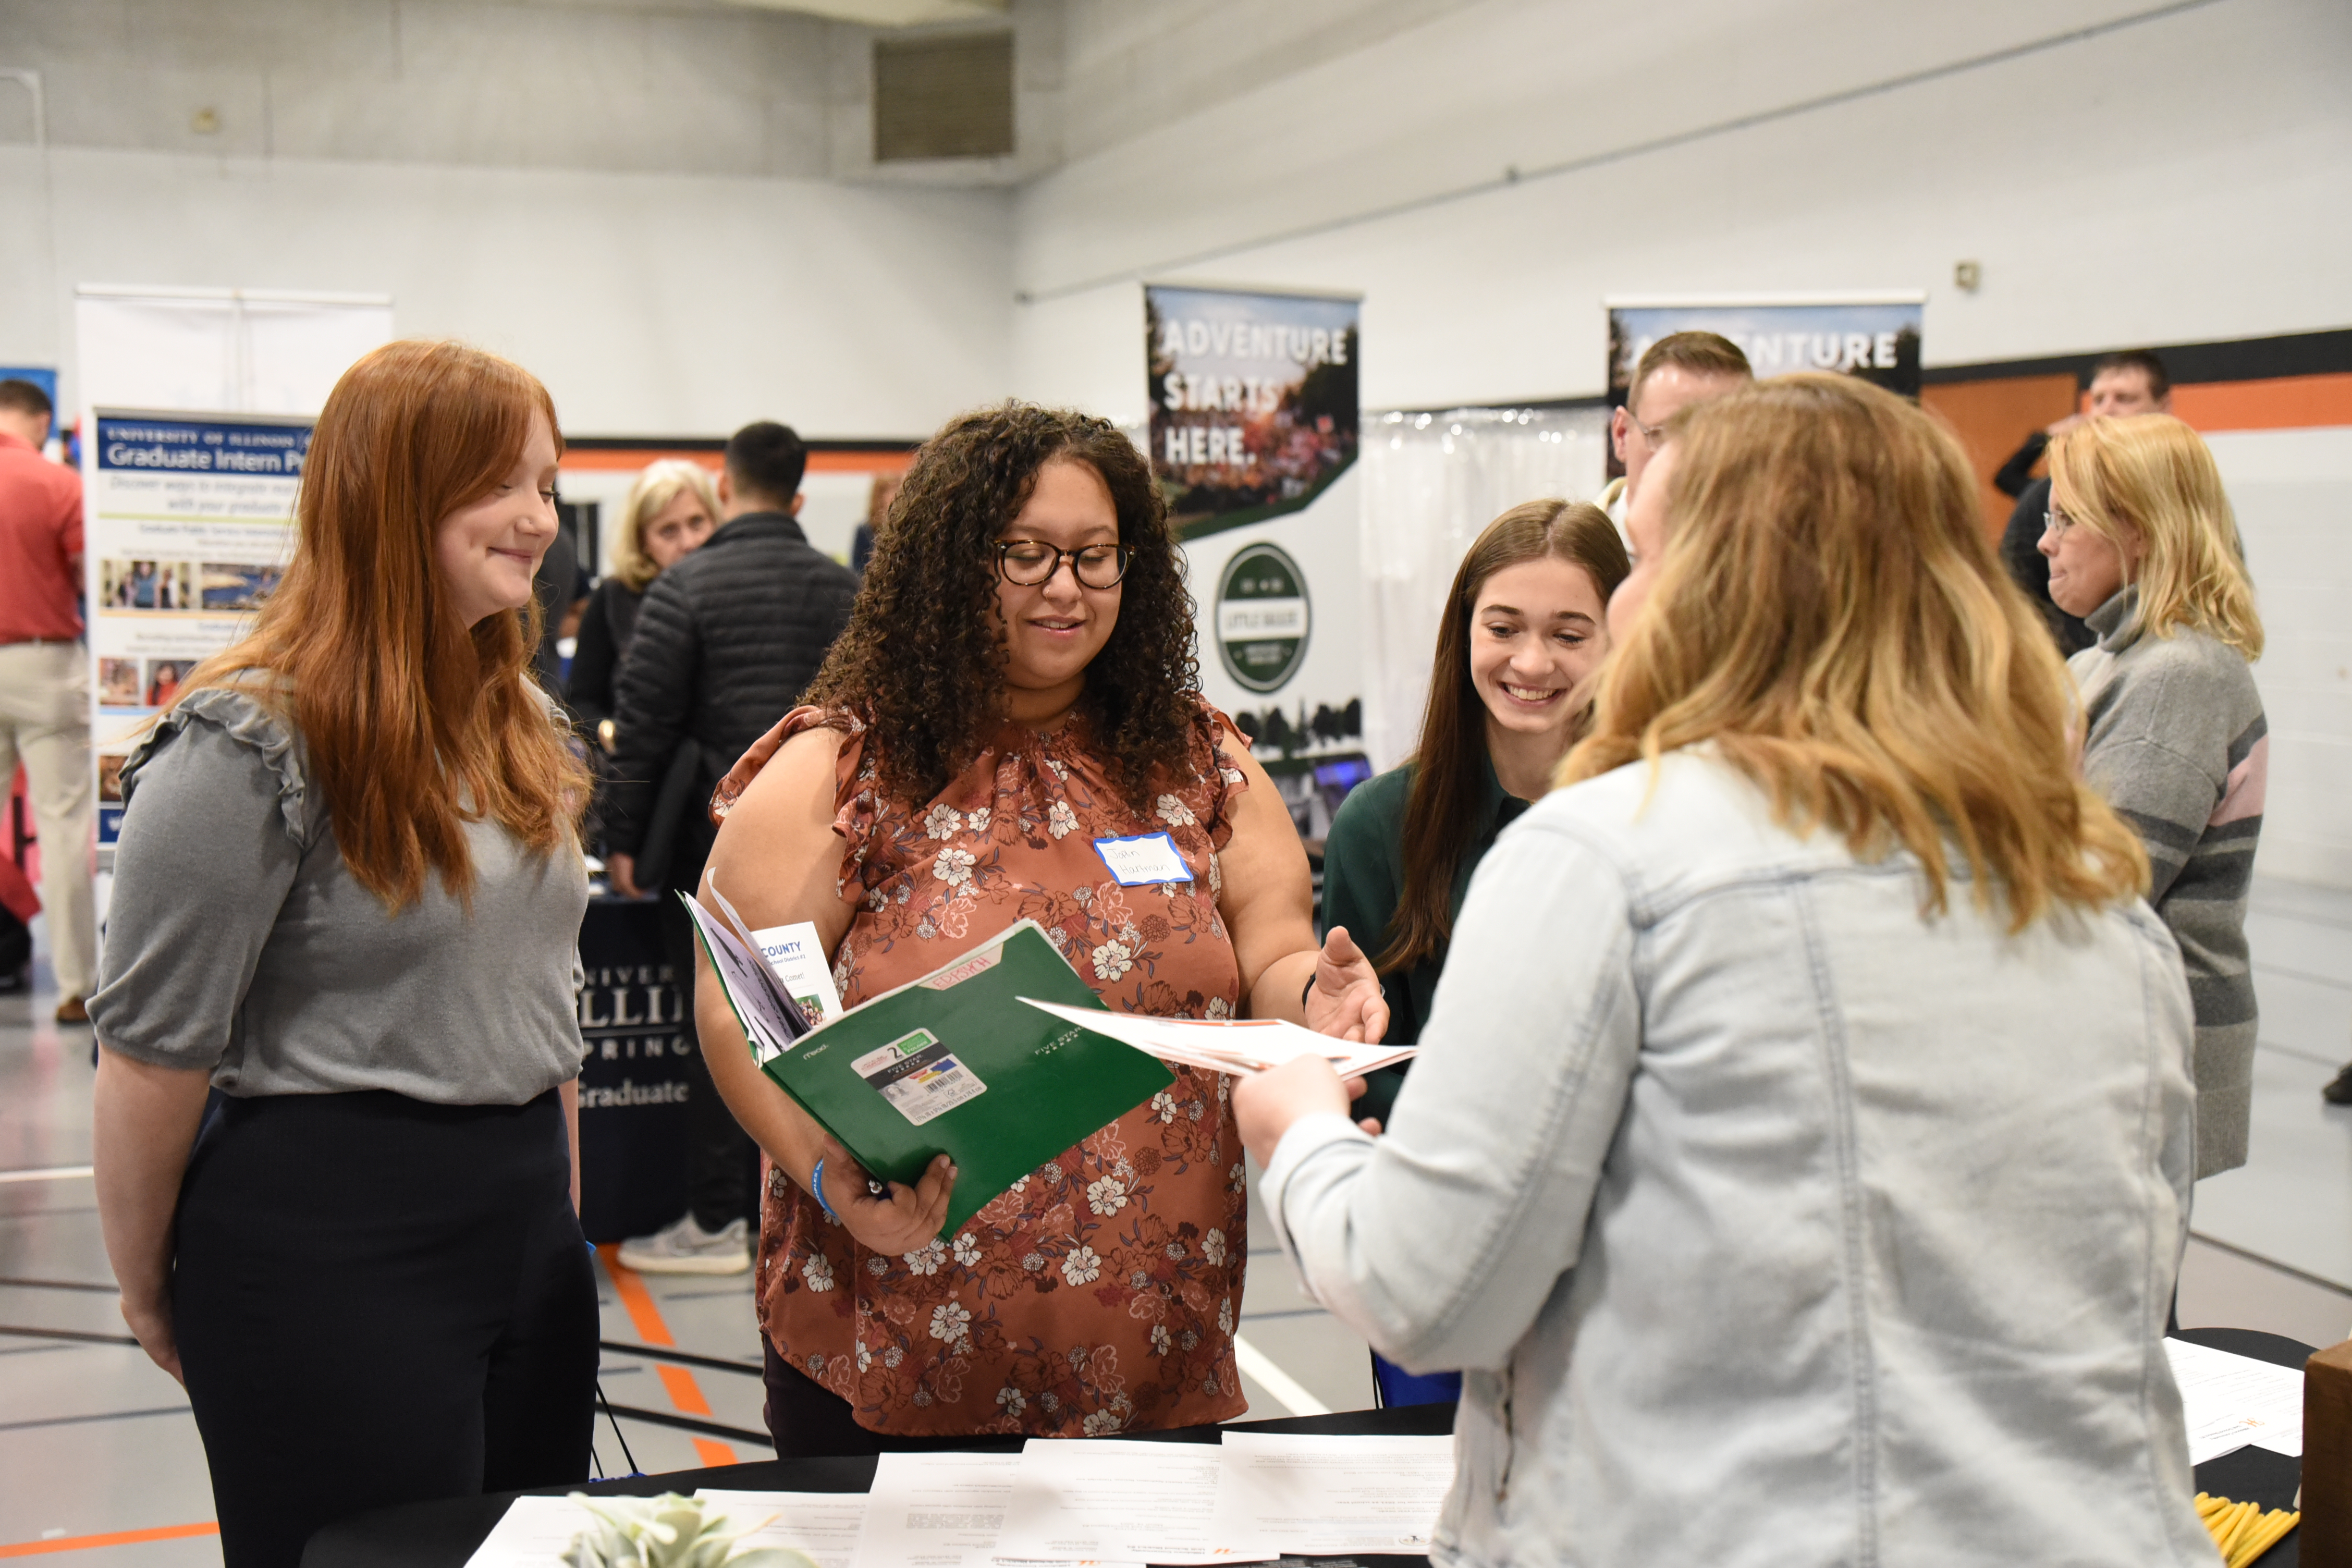 Career and Internship Fair provides opportunities for students